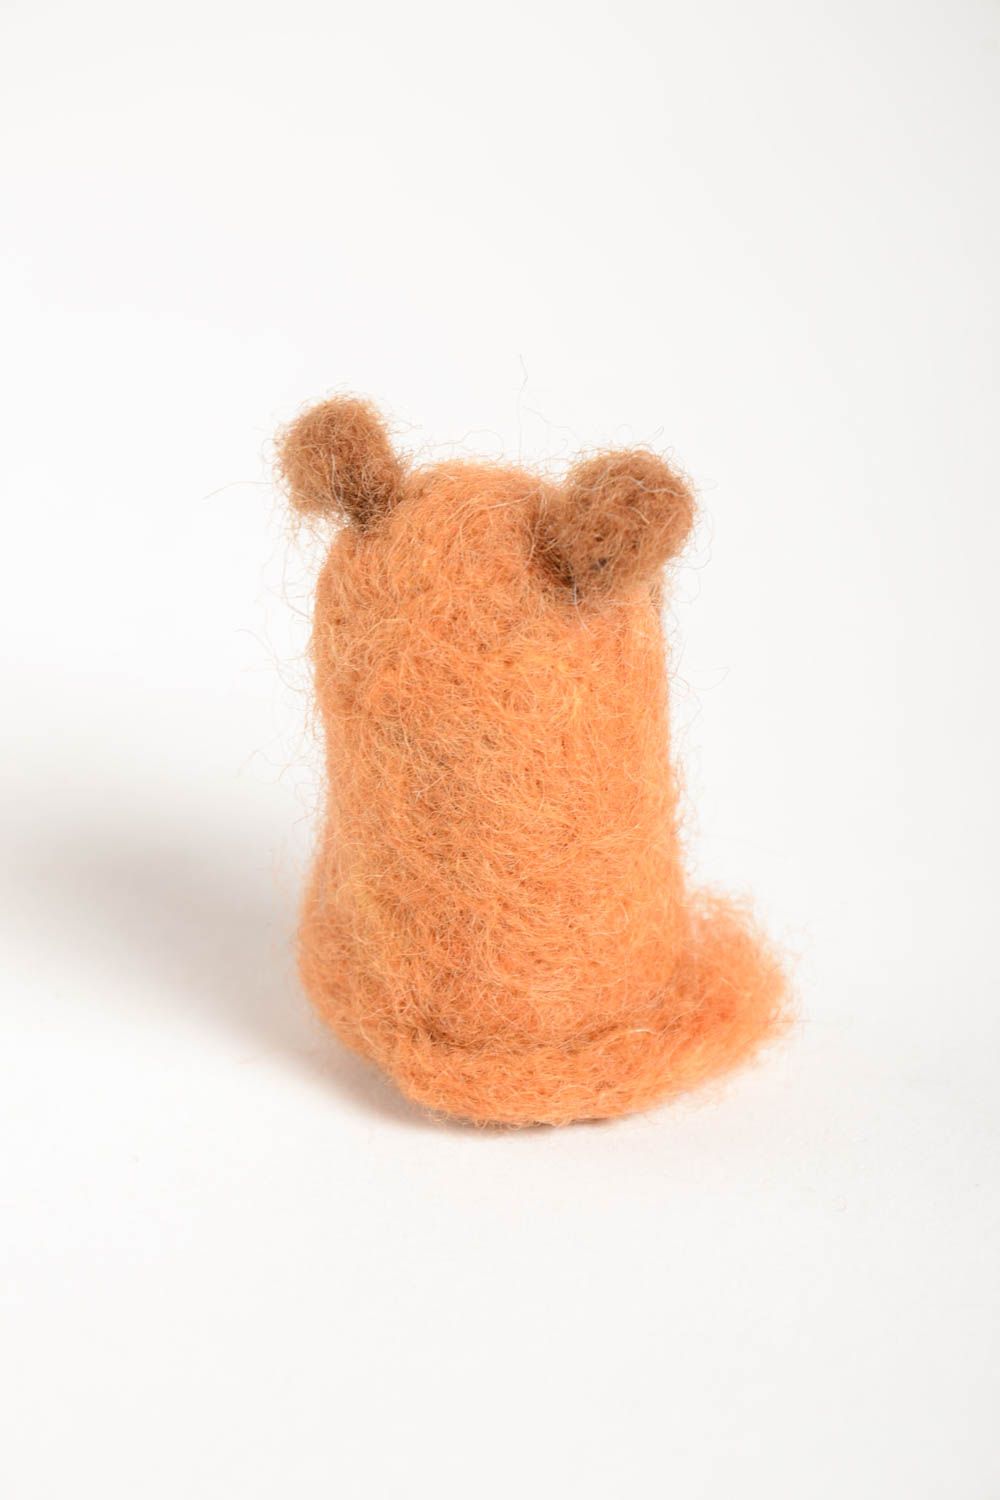 Handmade soft toy cute childrens toy felted wool toy home decoration ideas photo 3